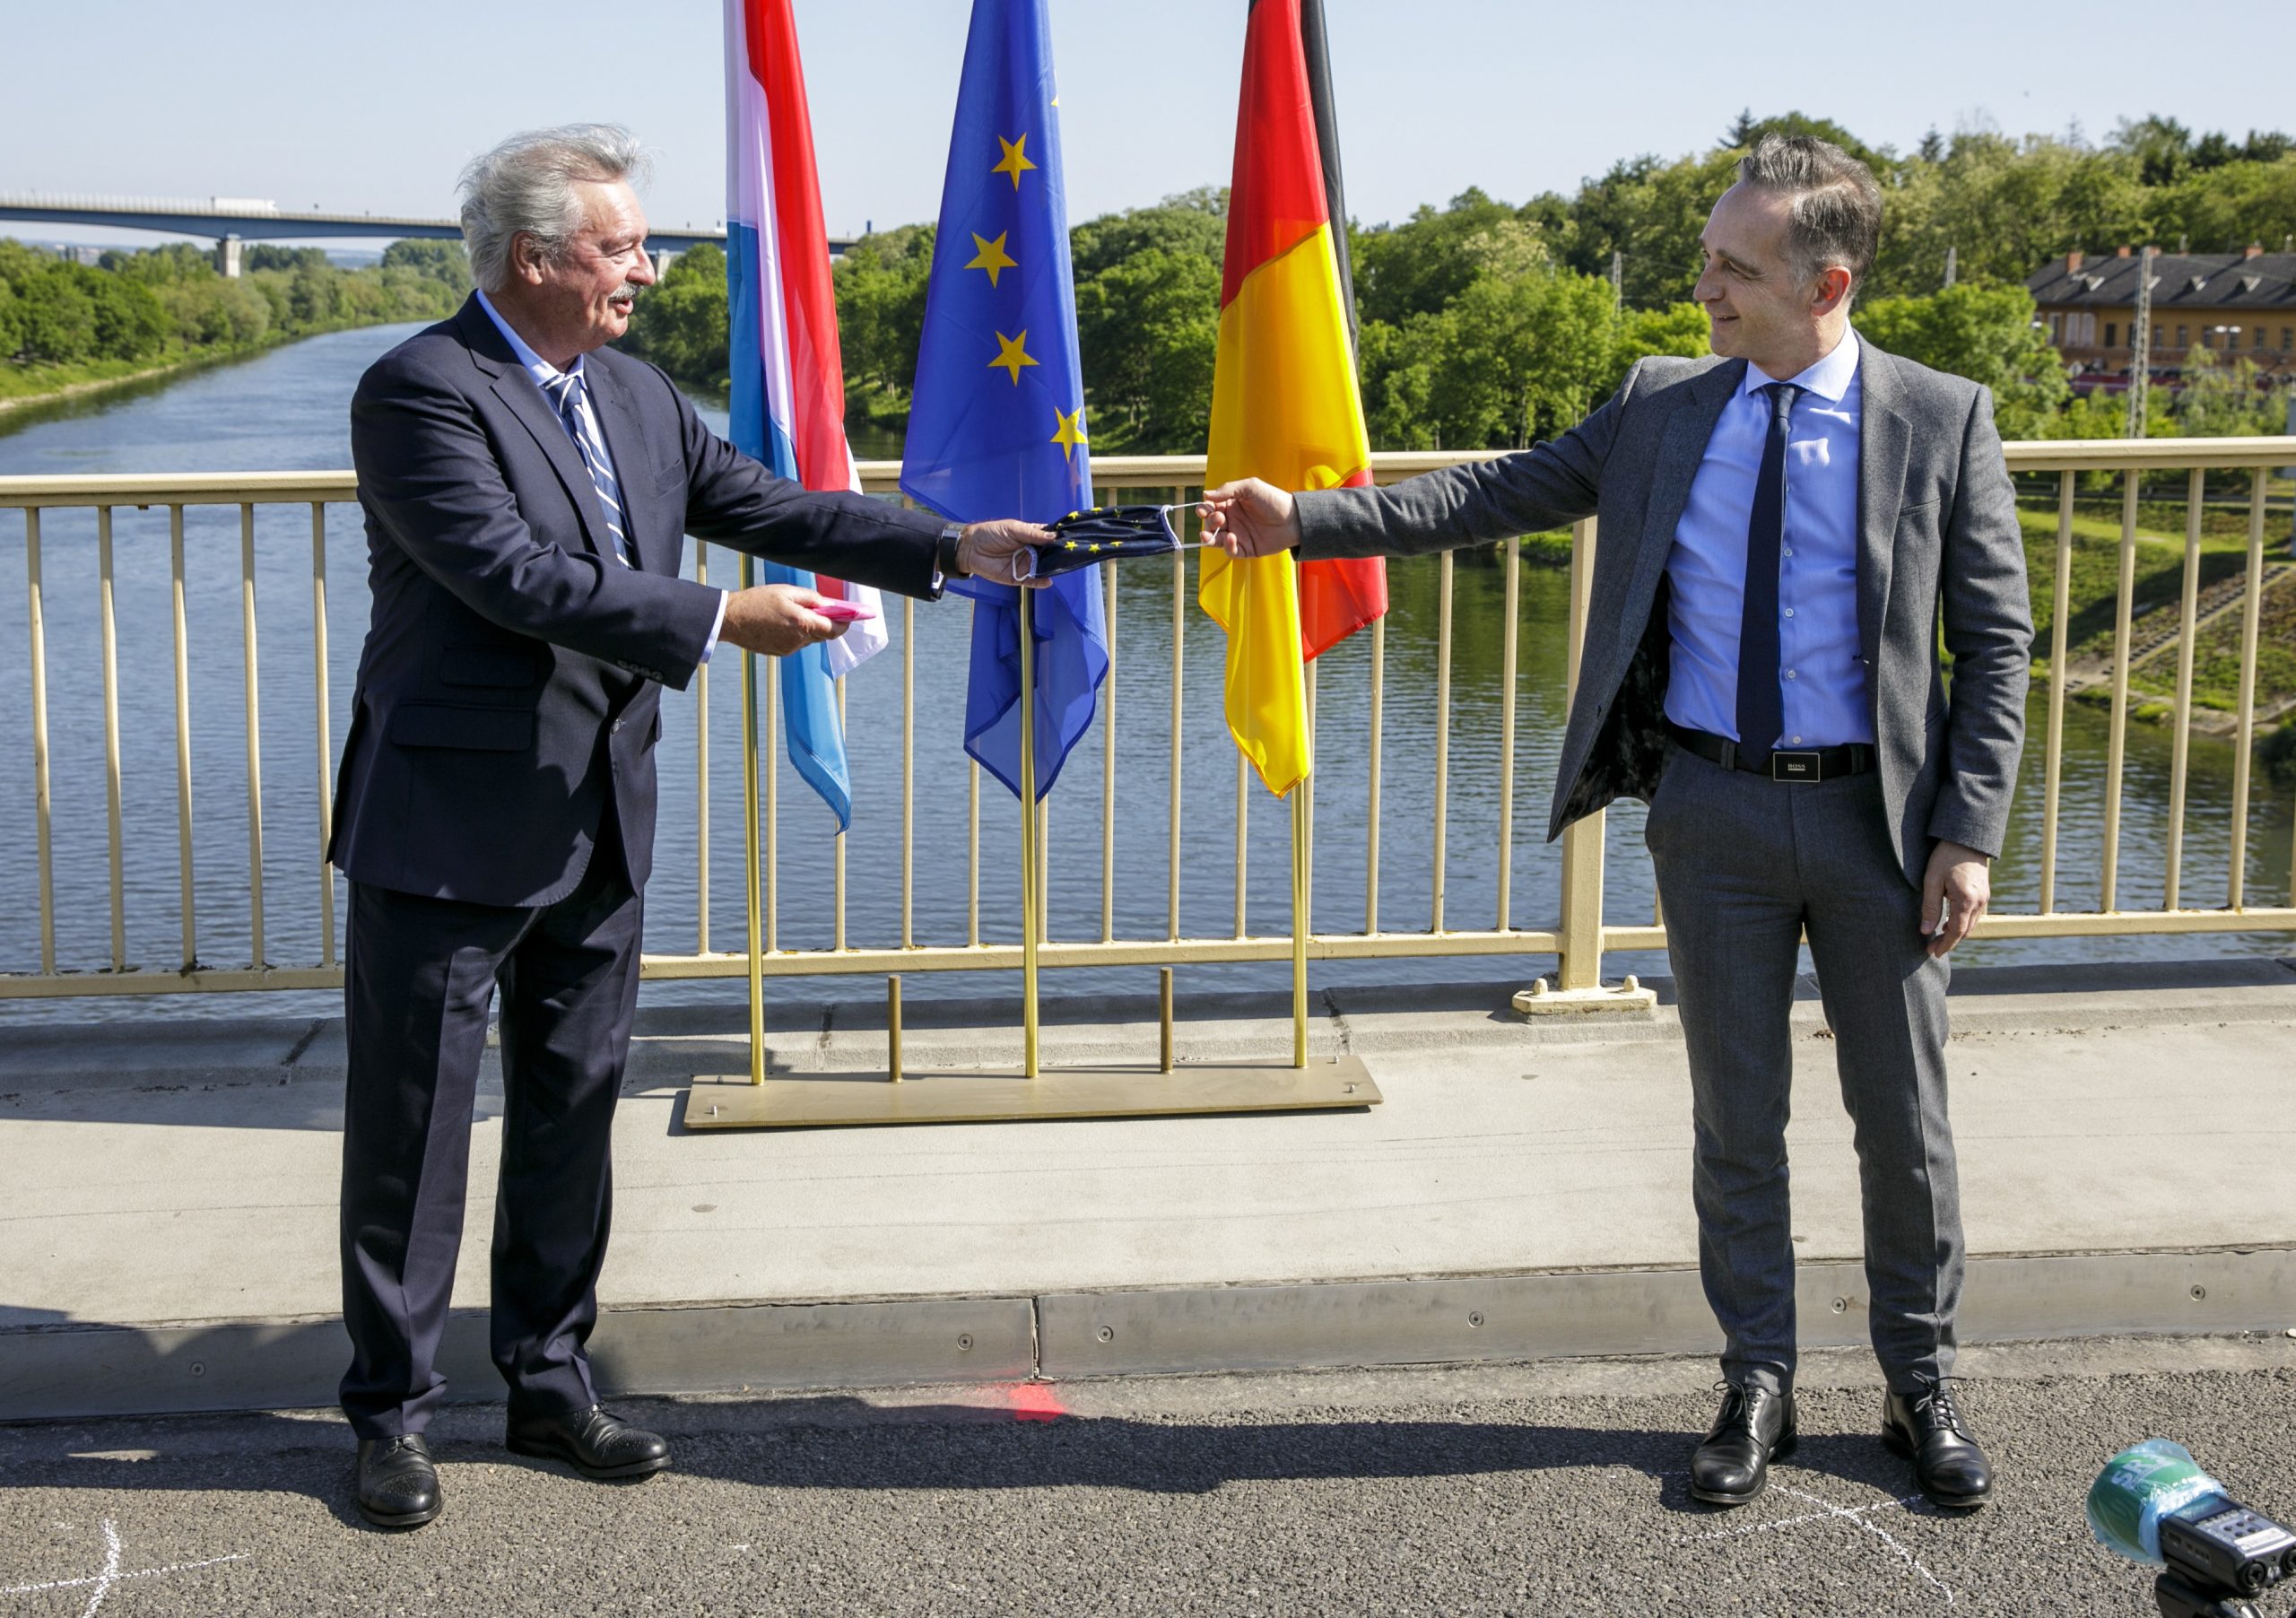 epa08425300 Germany's Foreign Affairs Minister Heiko Maas (R) and Luxembourg's Foreign Affairs Minister Jean Asselborn (L) meet on a bridge over the Moselle River between the cities of Perl and Schengen, Luxembourg, 16 May 2020, on the day of the reopening of their common border after a gradual lifting of controls introduced in March to curb the spread of the coronavirus disease (COVID-19) pandemic.  EPA/THOMAS IMO / POOL